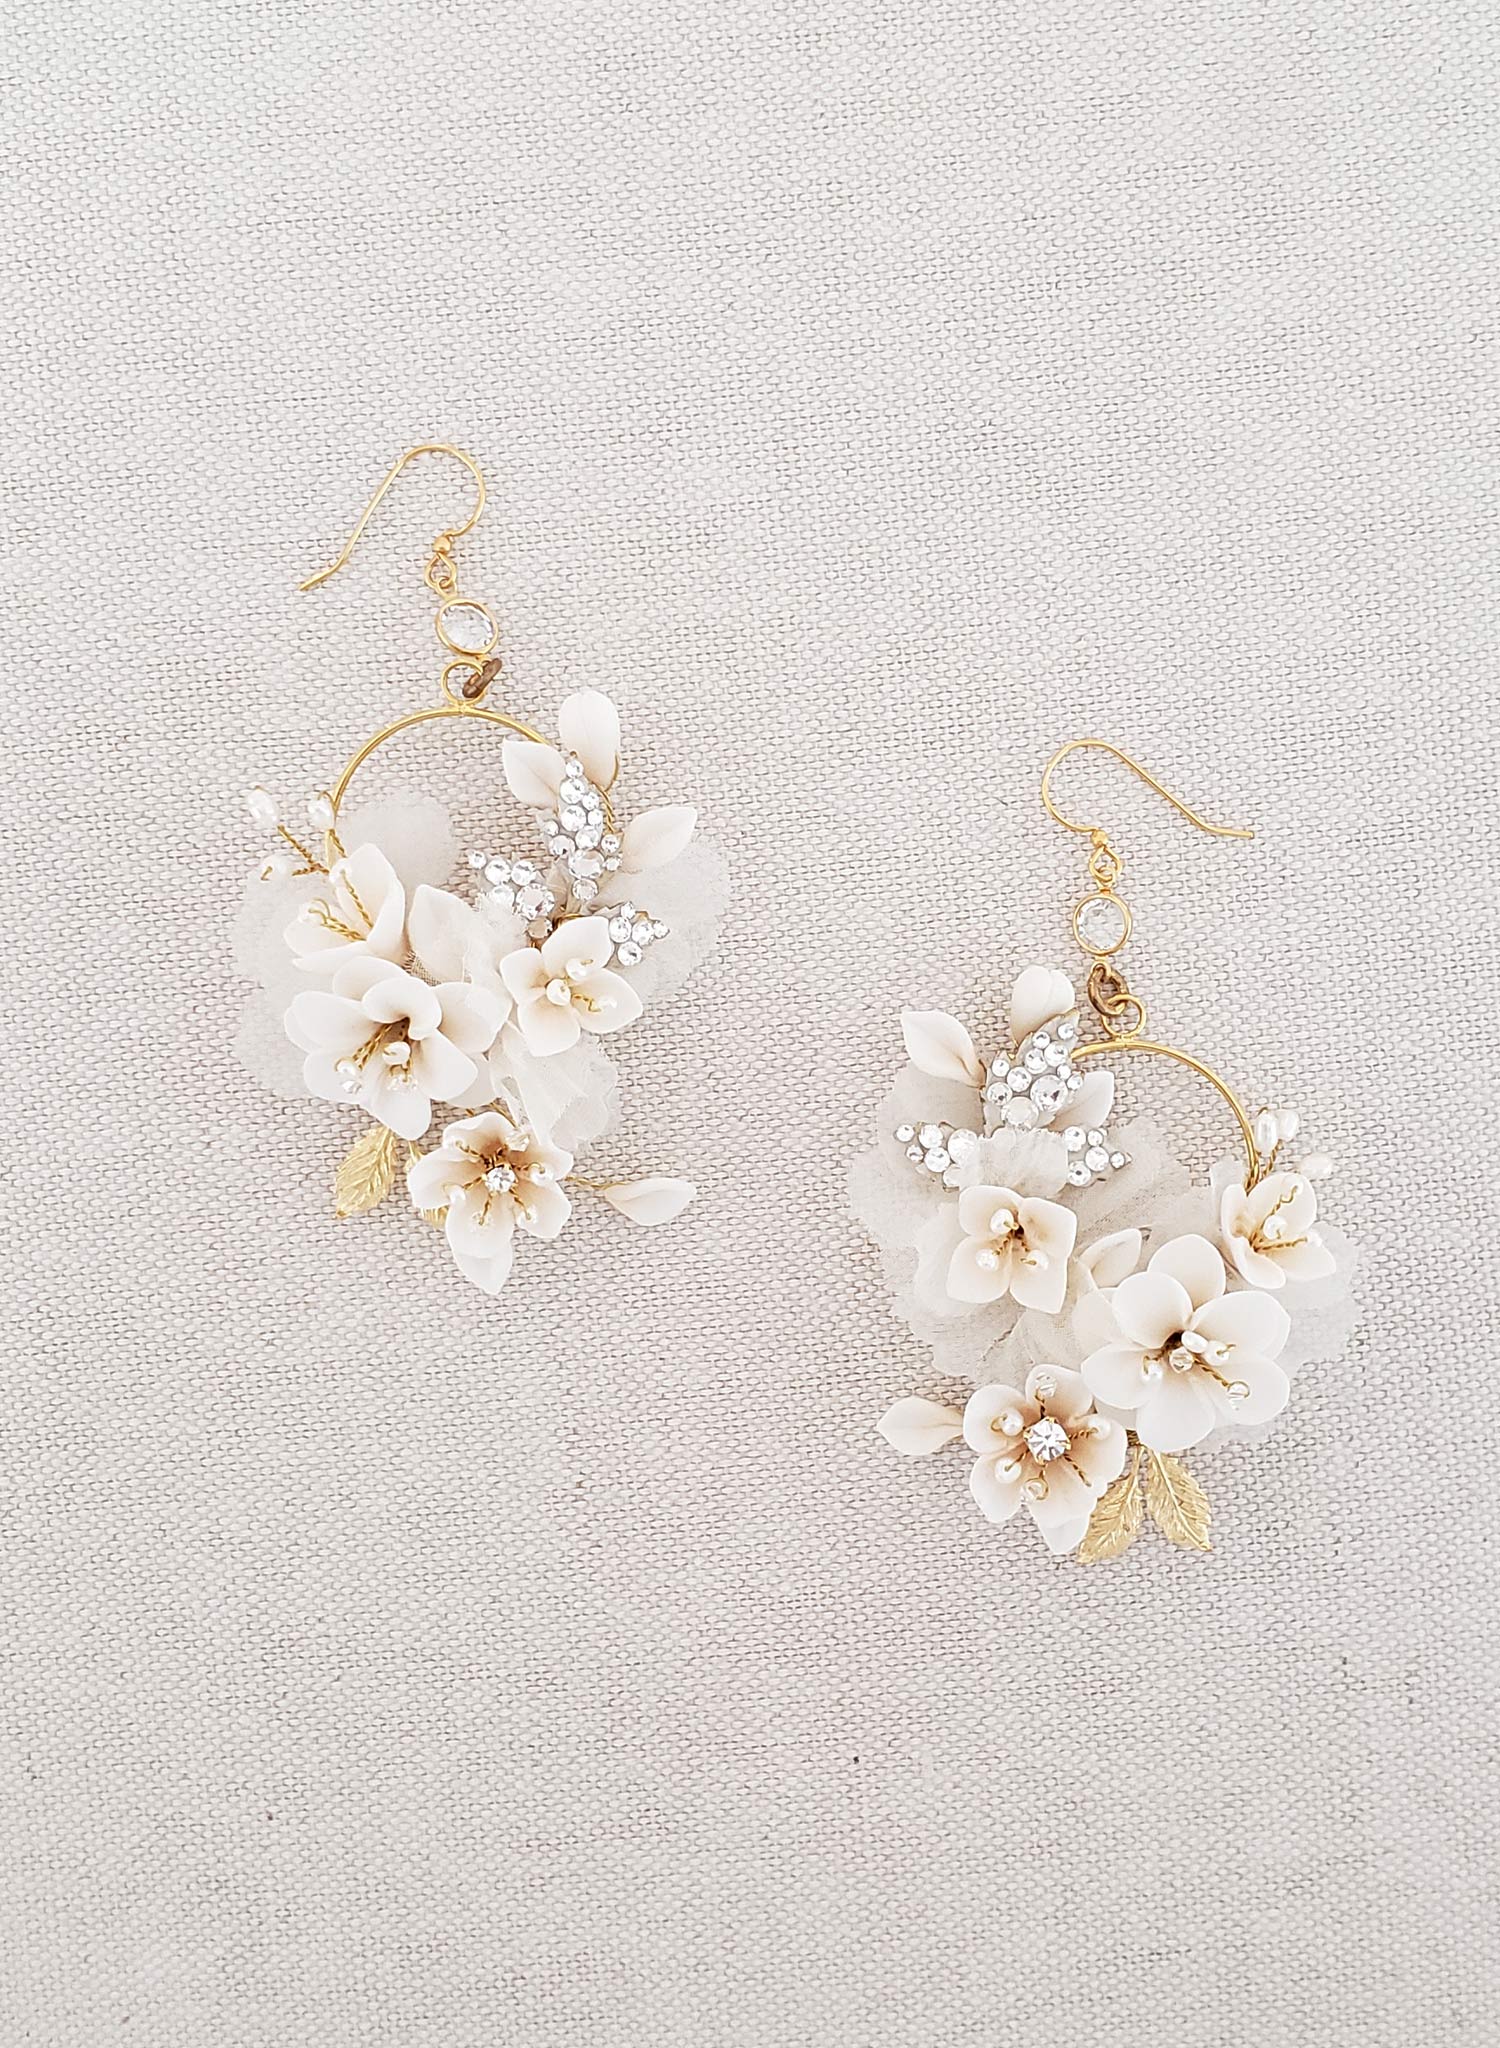 Rose Gold Floral Statement Earrings | Wedding Jewelry for Bride Rose Gold Earrings Only